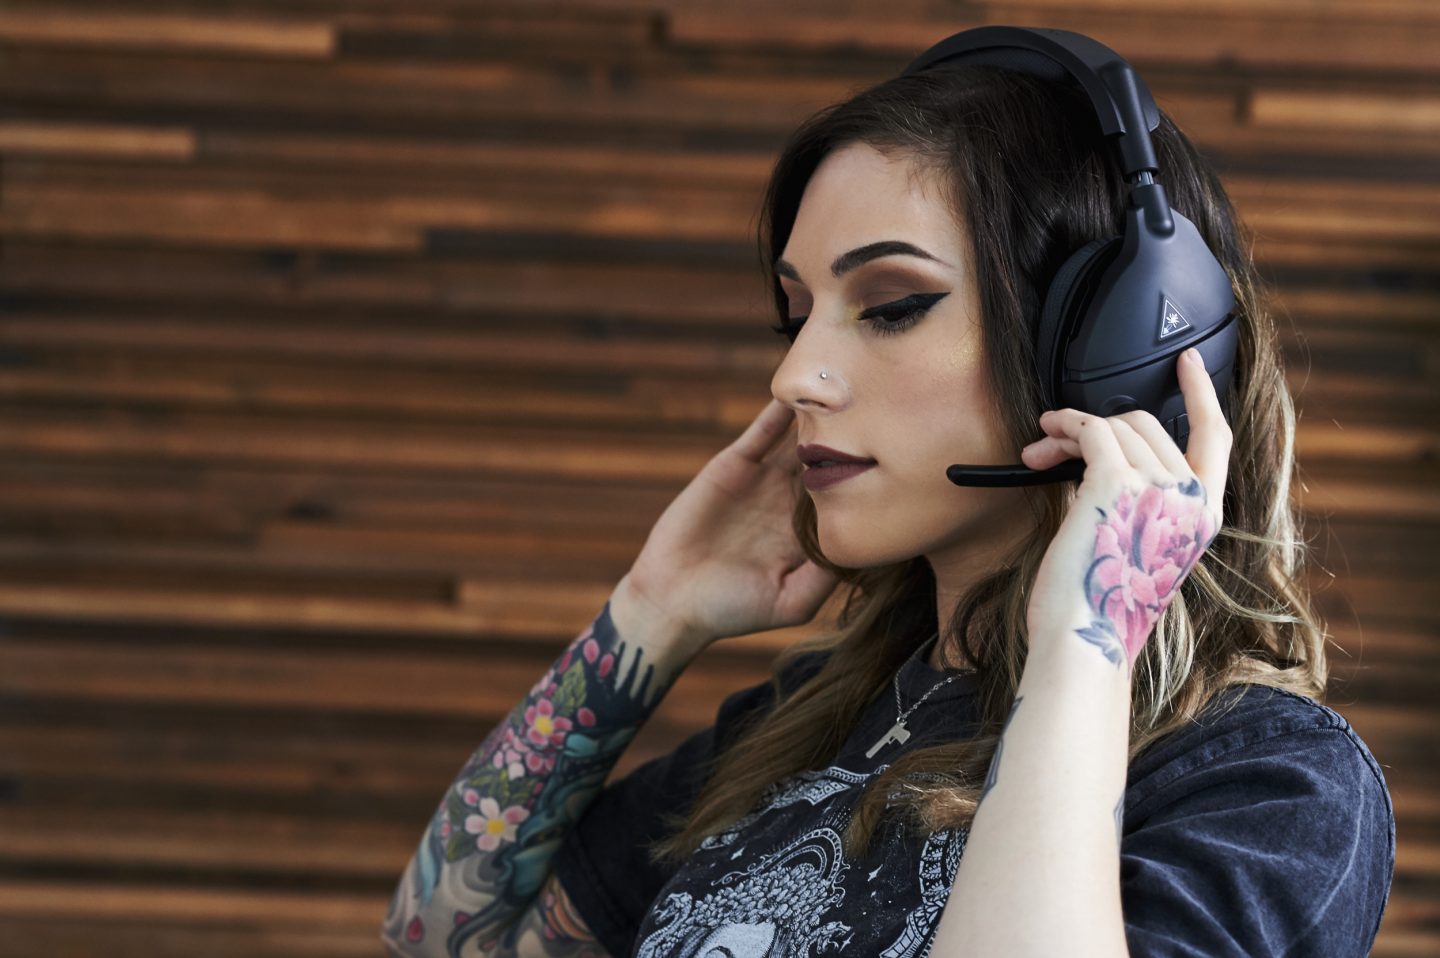 Turtle Beach Launches Into PC Gaming With Three All-New Atlas Gaming ...